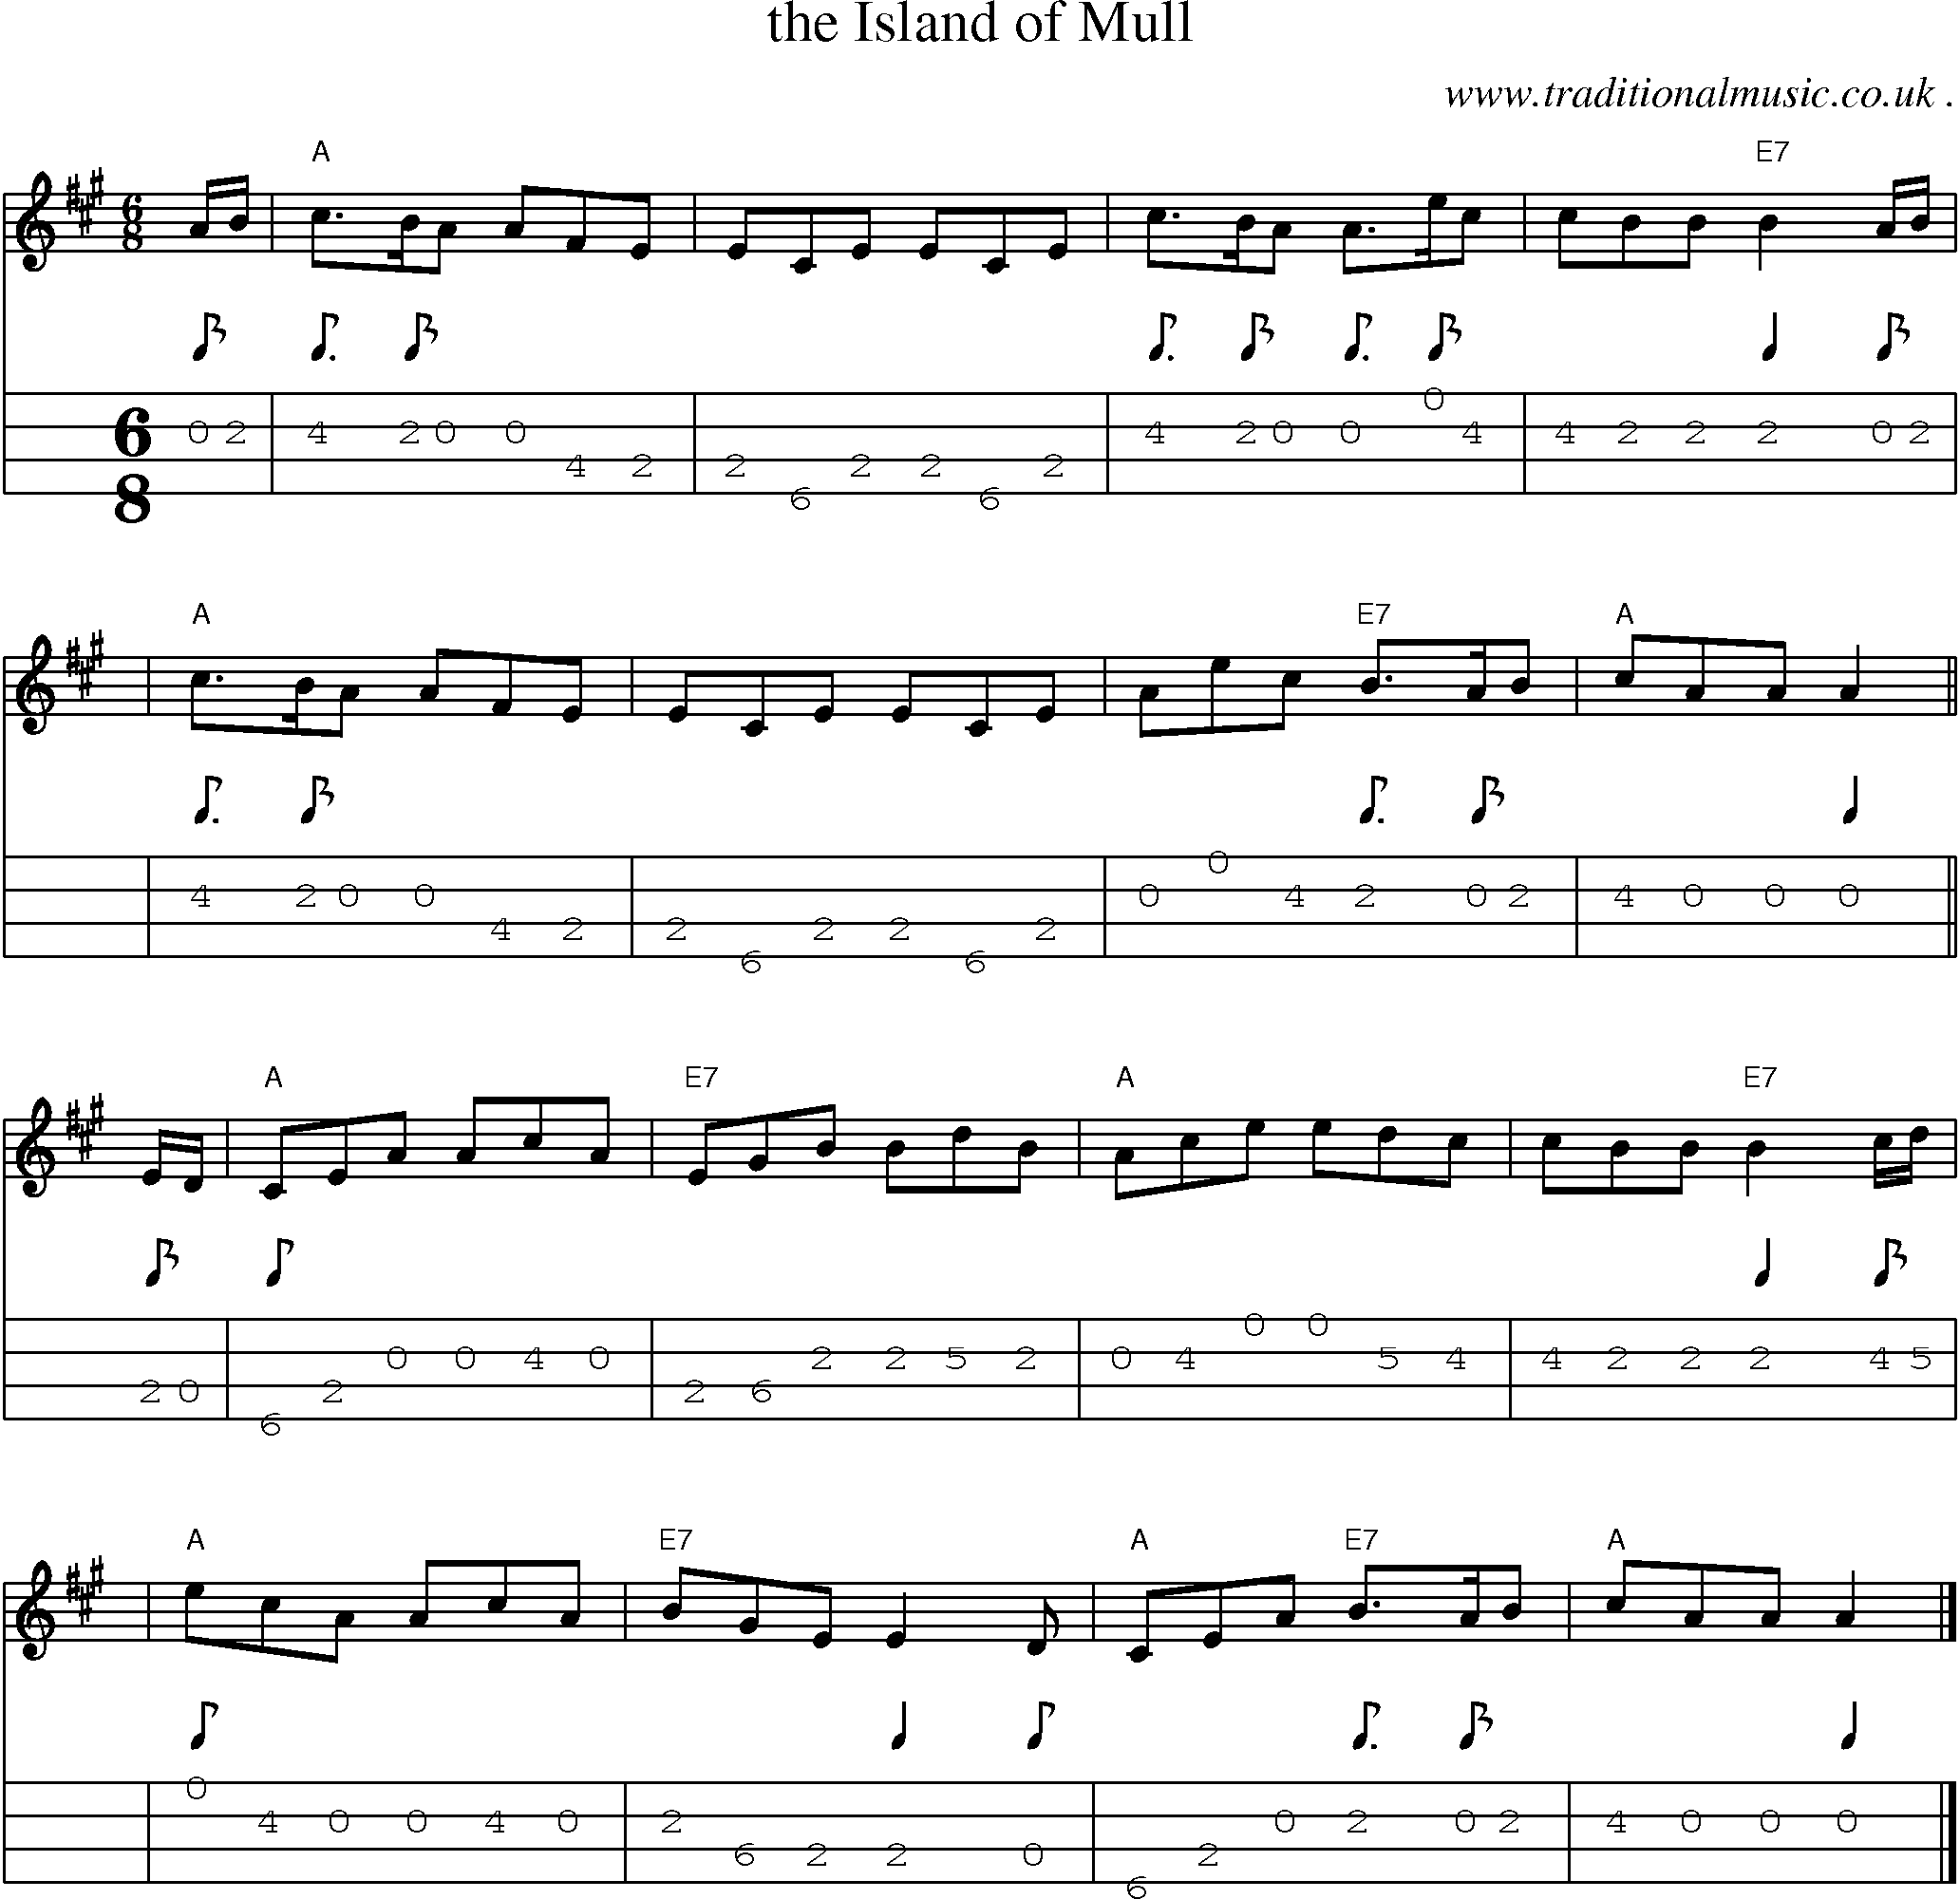 Sheet-music  score, Chords and Mandolin Tabs for The Island Of Mull